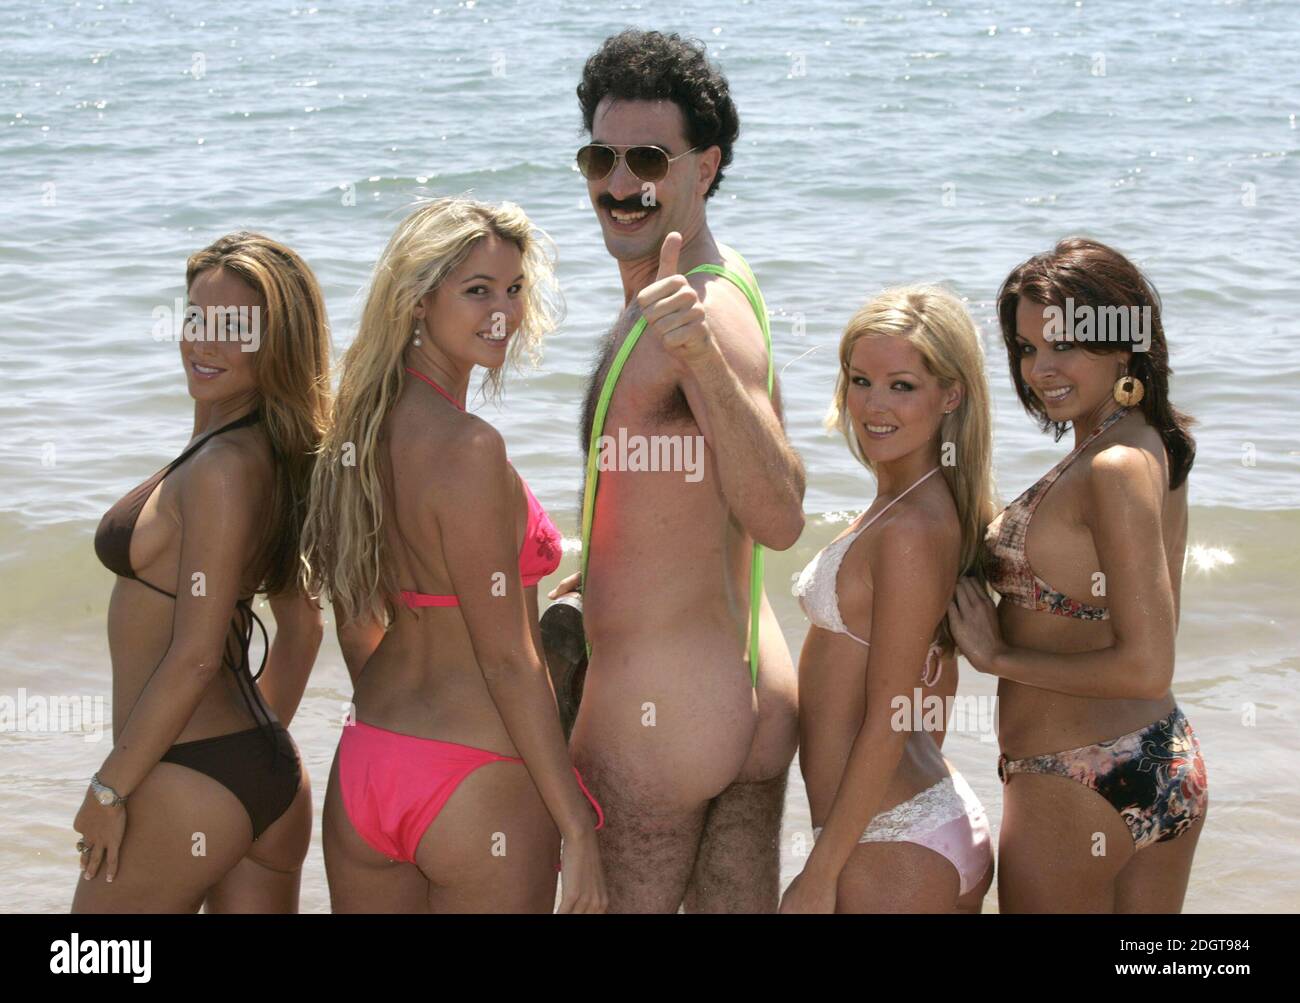 Borat complete with thong and girls. Stock Photo